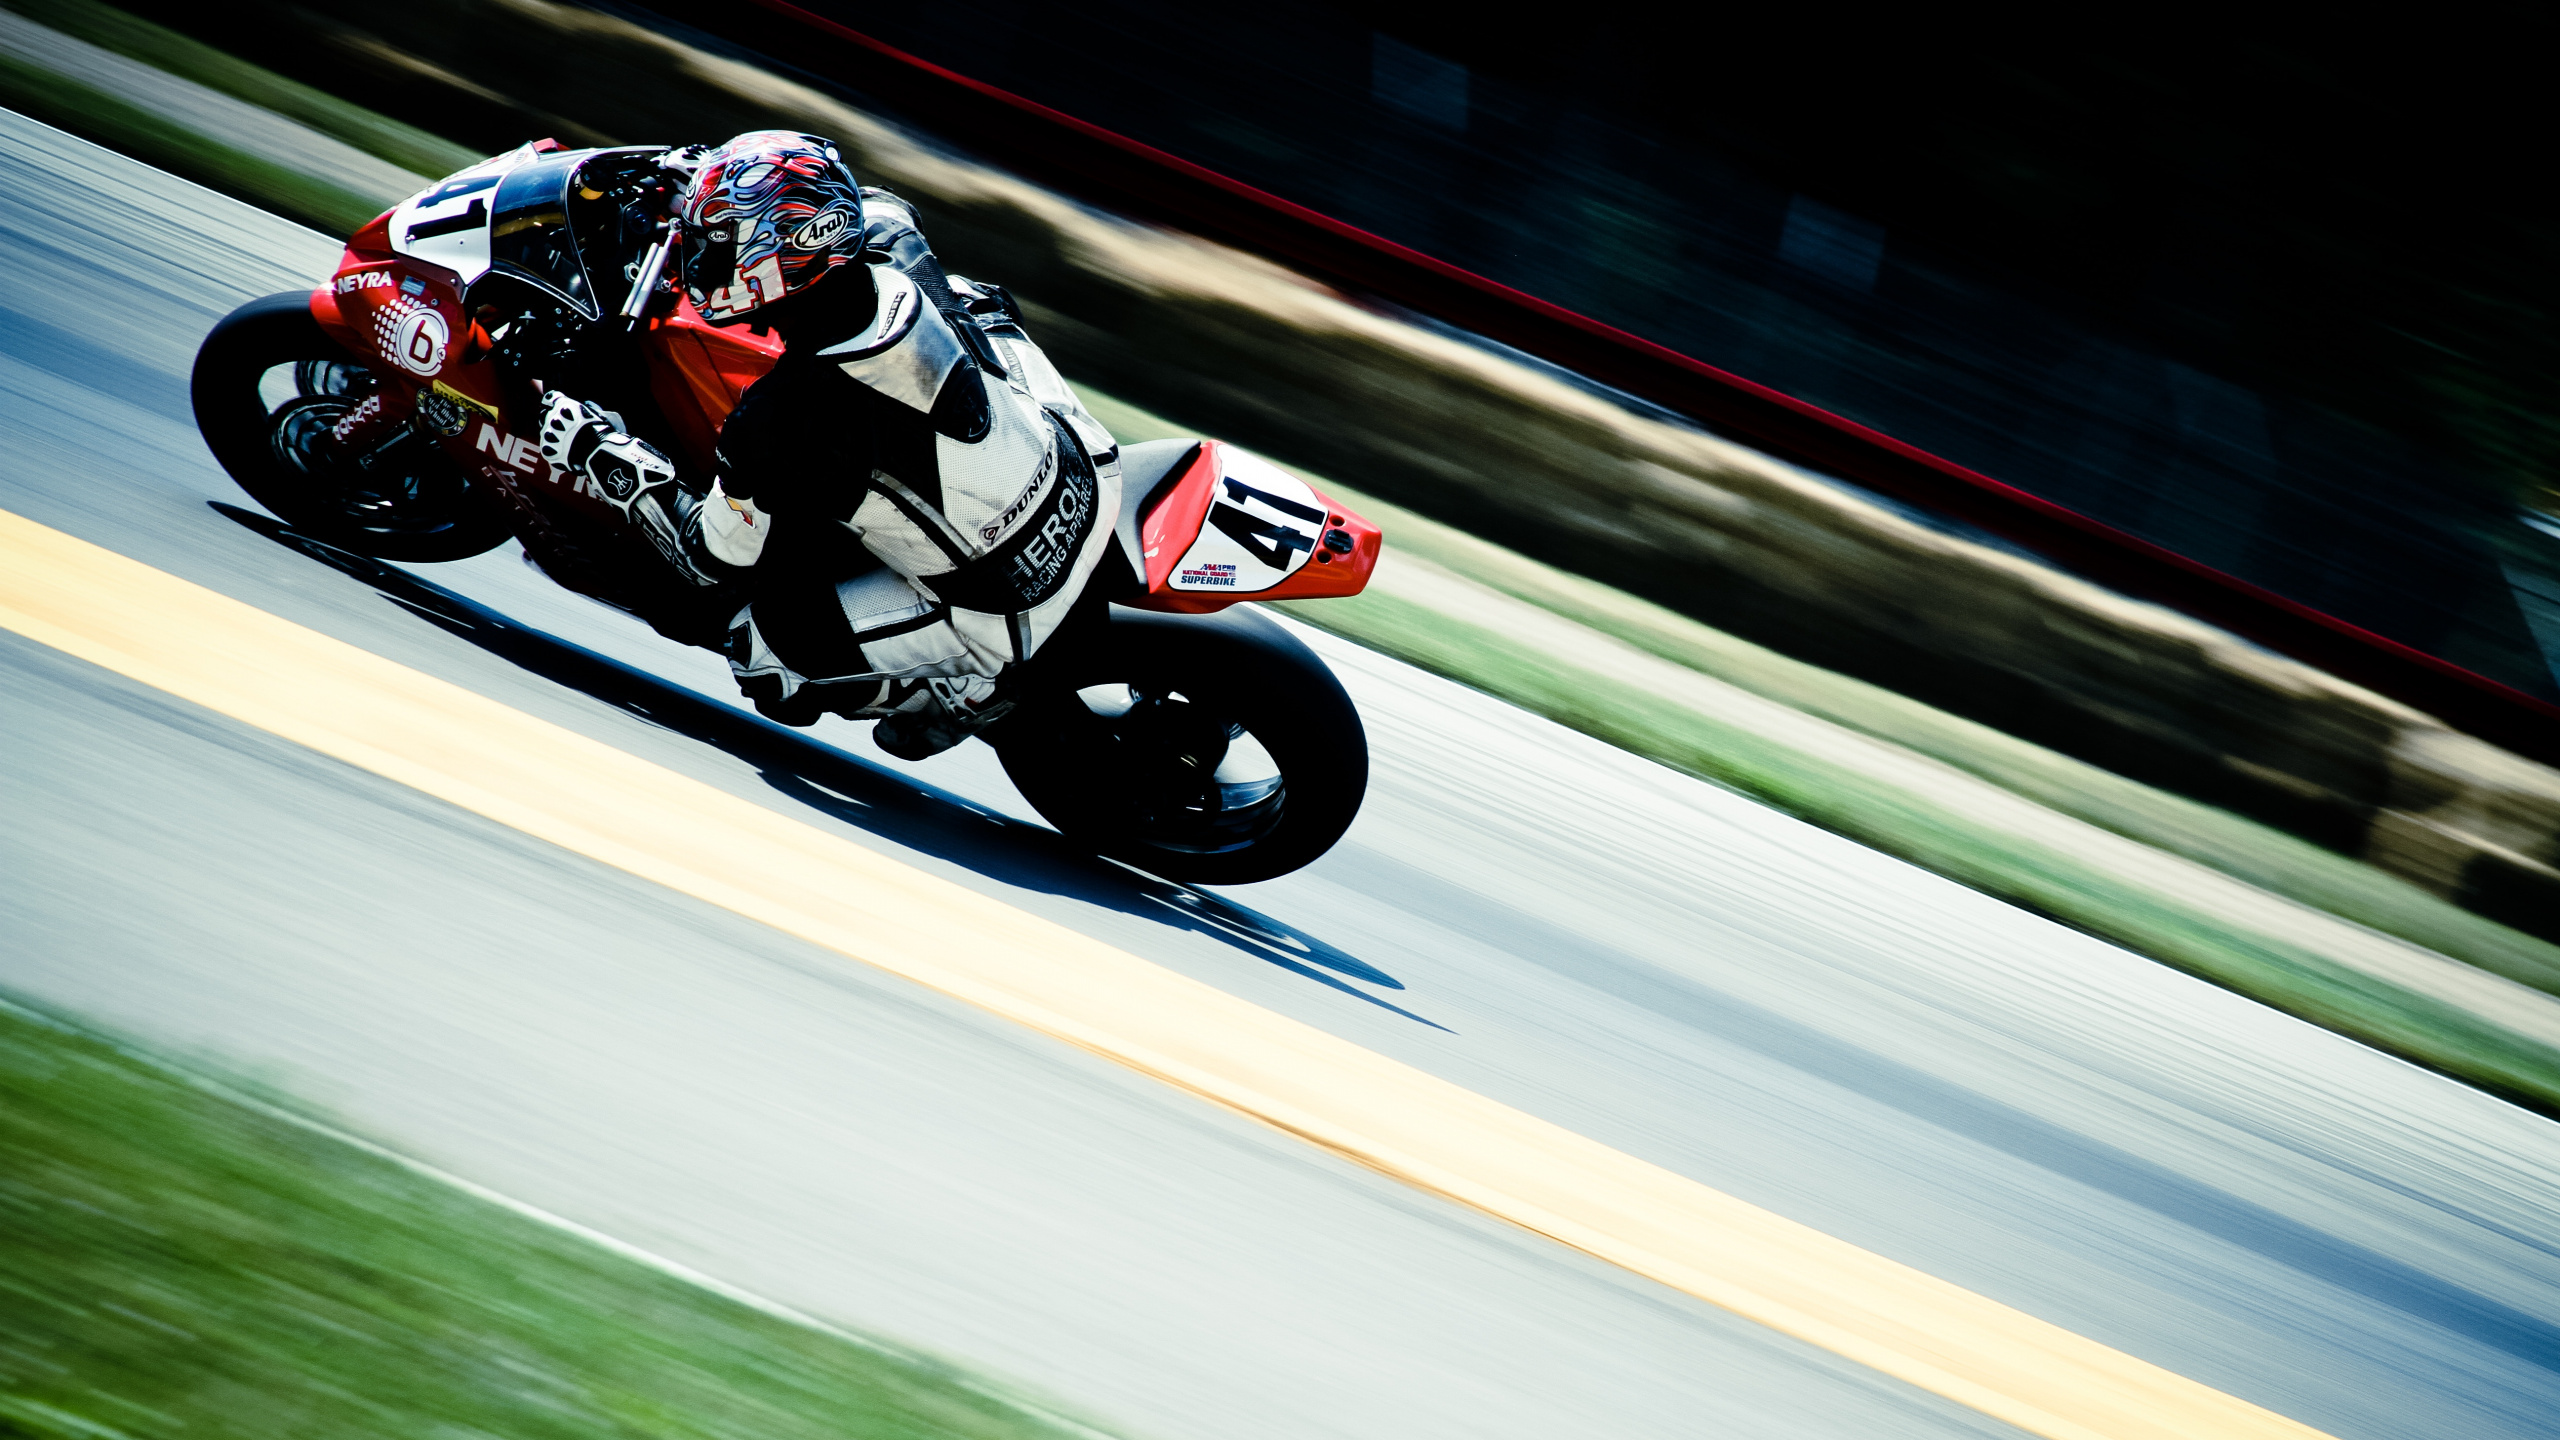 Man in Red and White Racing Suit Riding on Sports Bike. Wallpaper in 2560x1440 Resolution